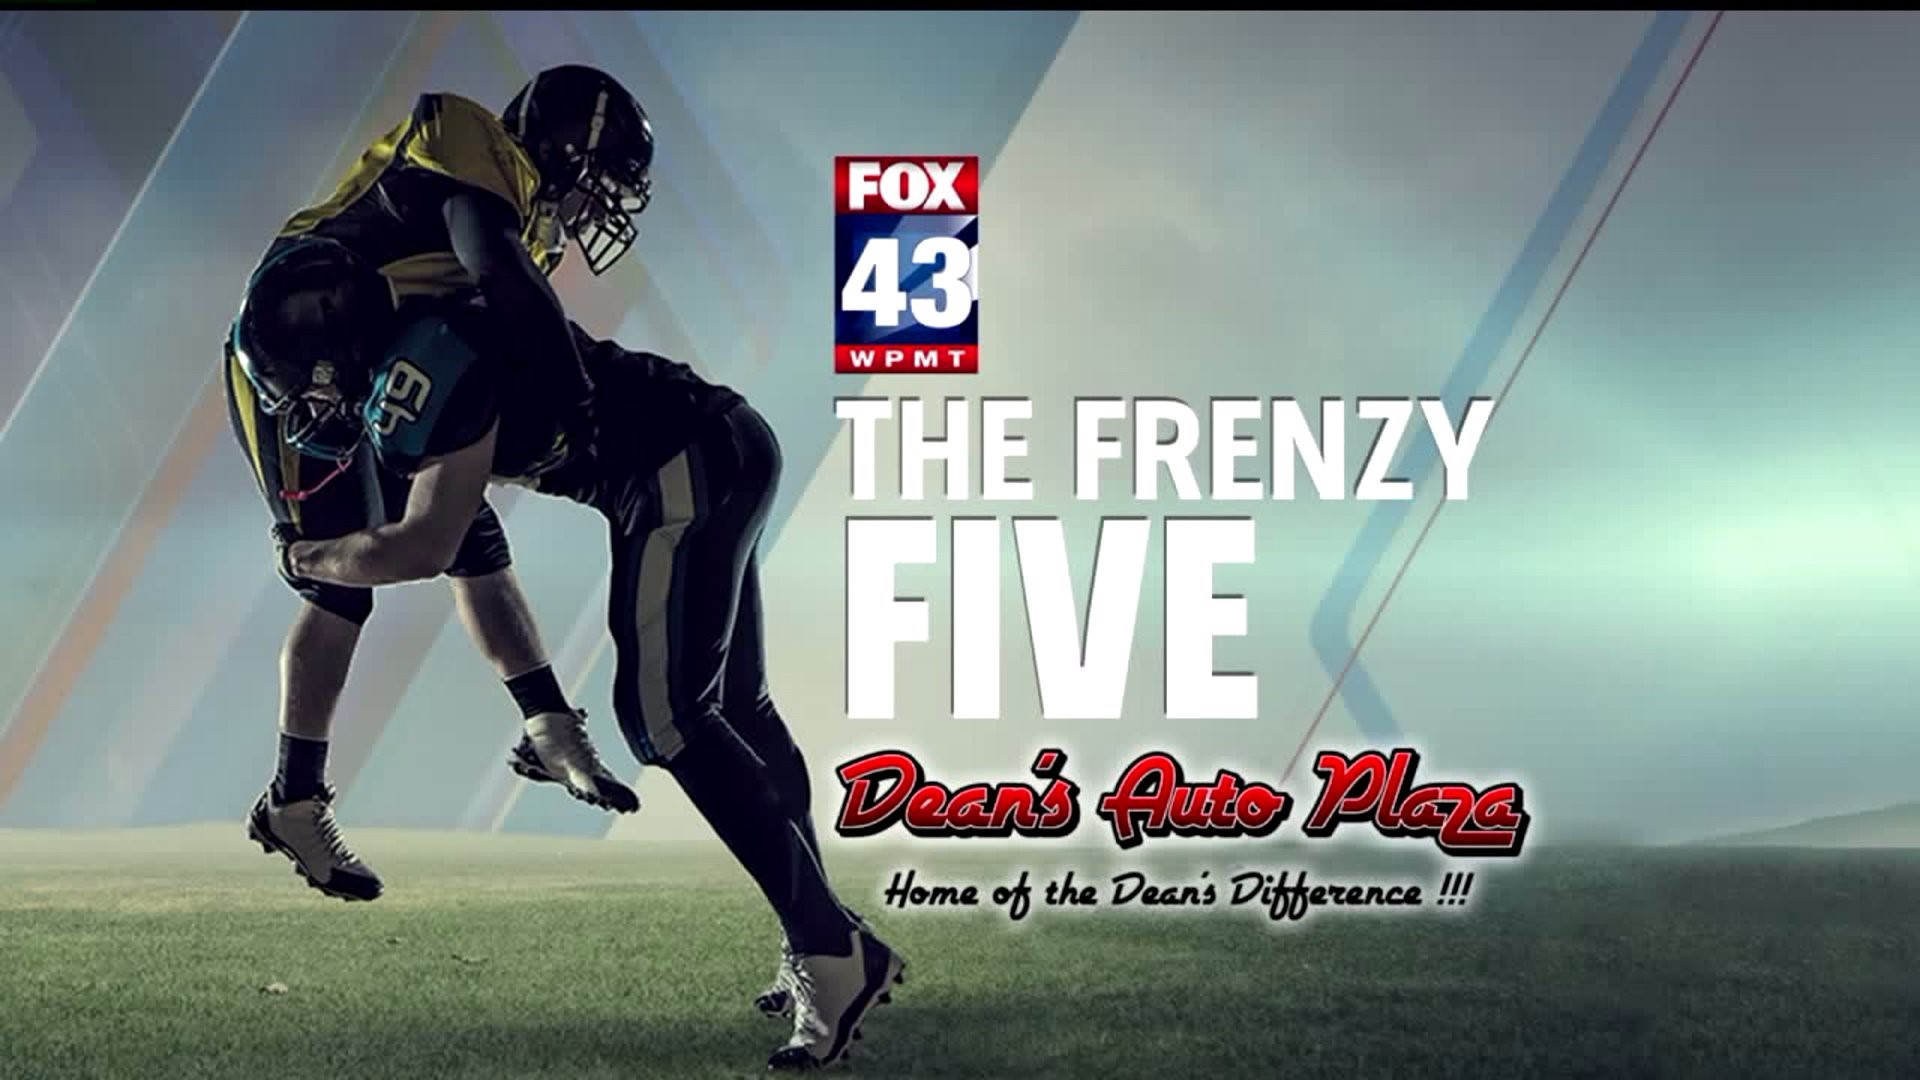 The Frenzy Five week 2 matchups